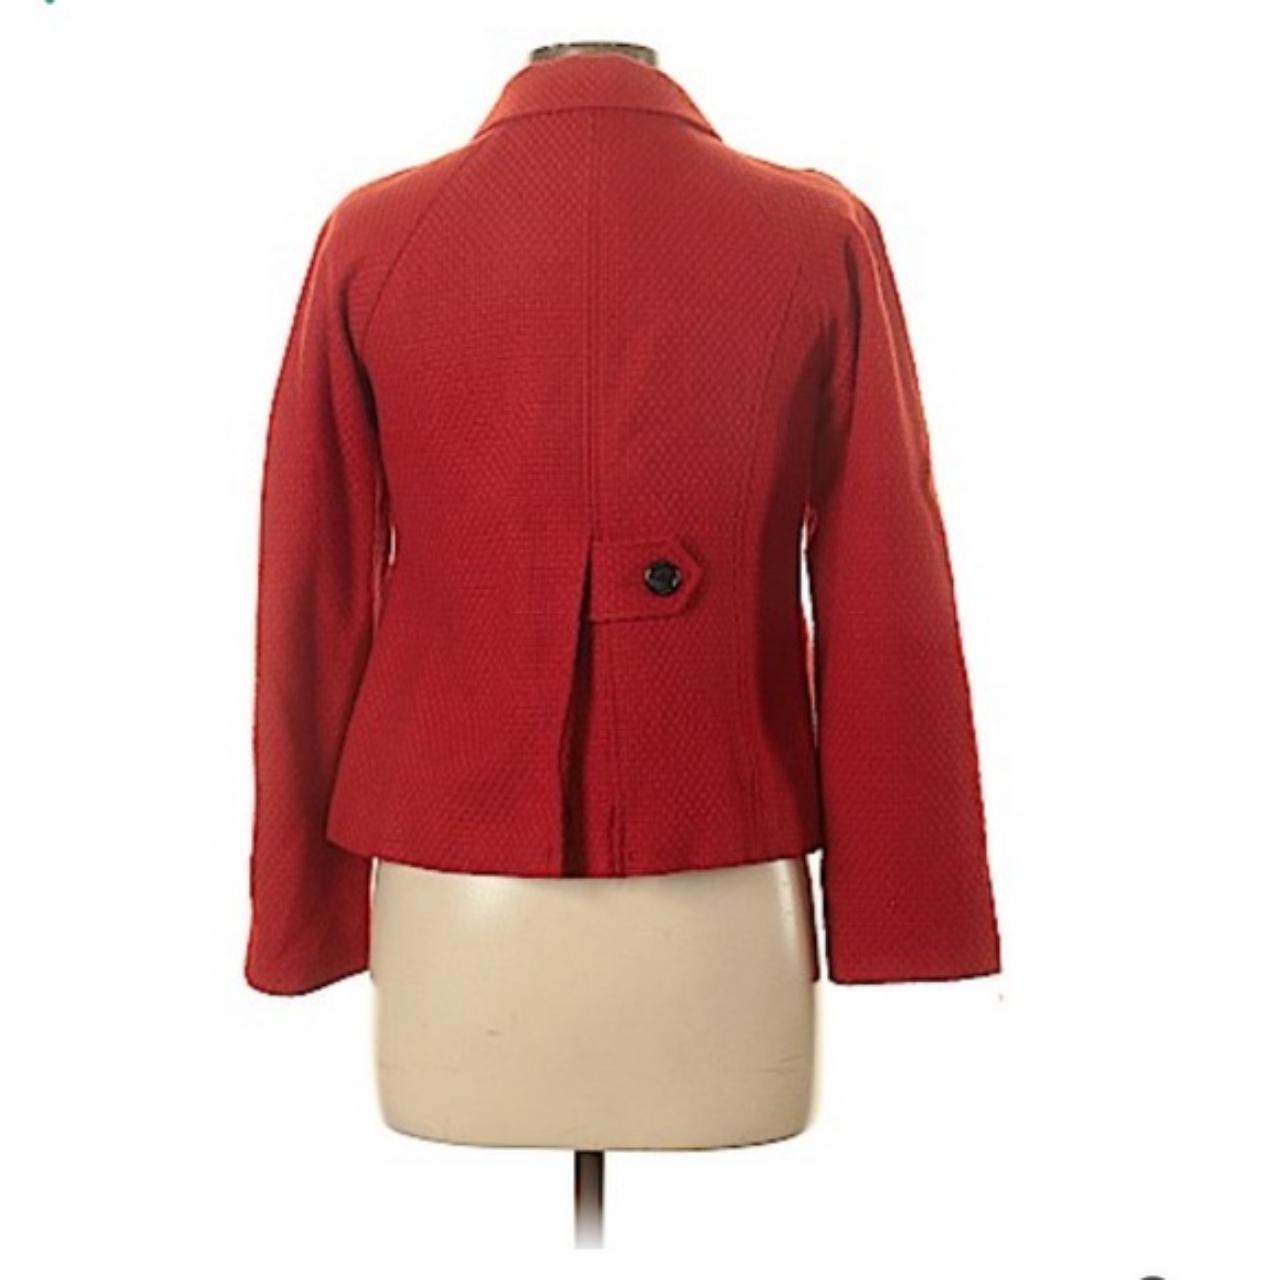 Women's Red and Black Coat (2)